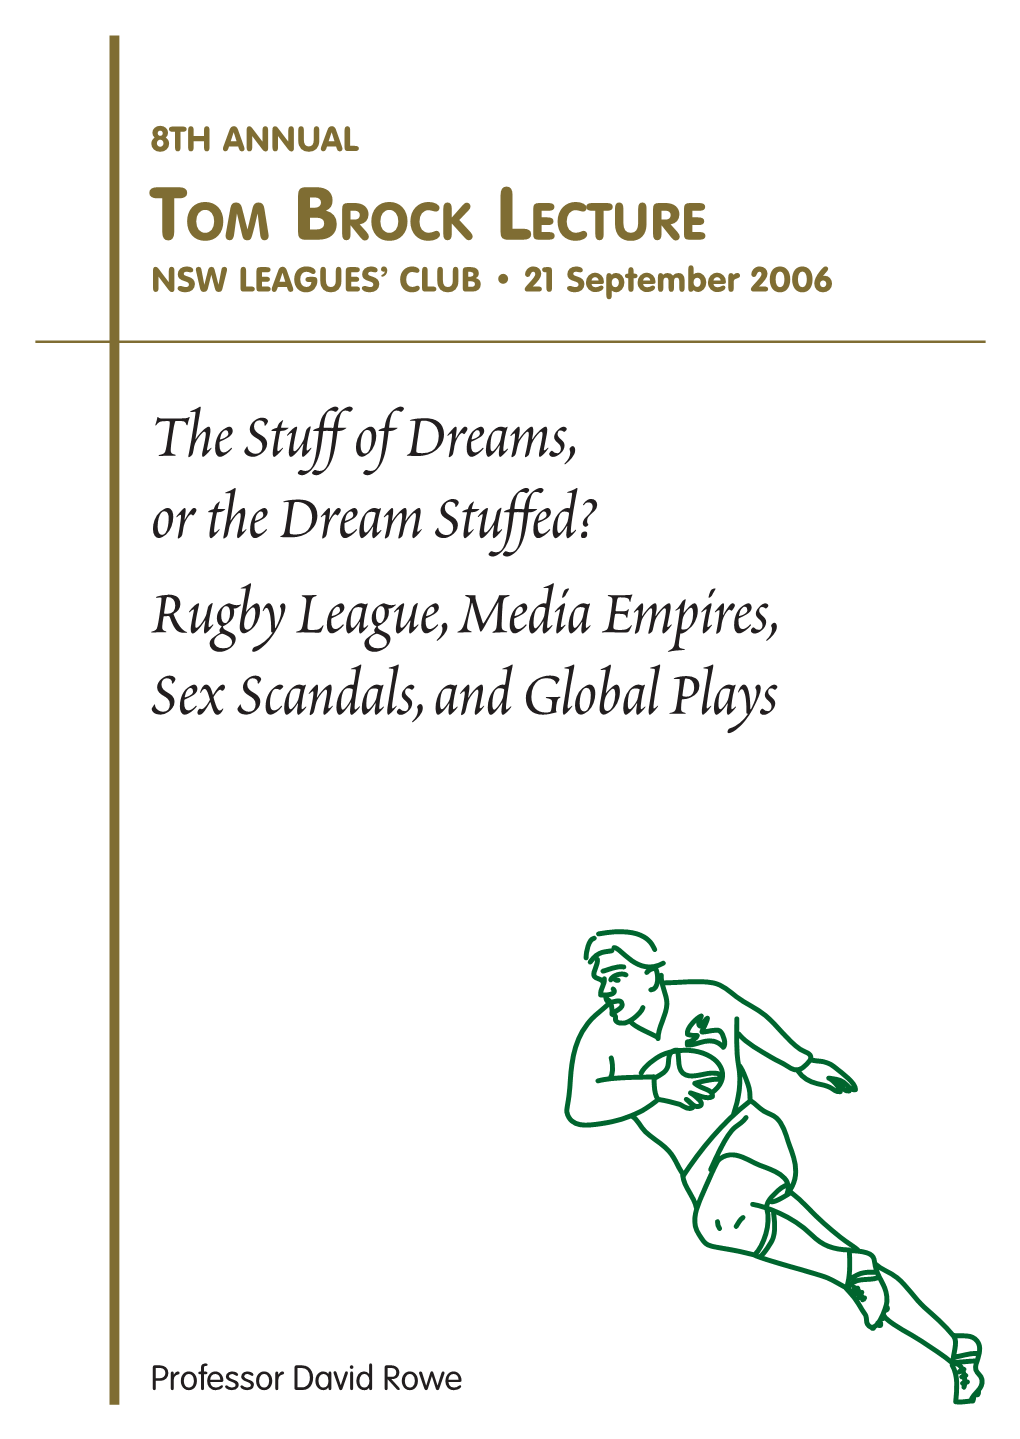 Tom Brock Lecture NSW LEAGUES’ CLUB • 21 September 2006